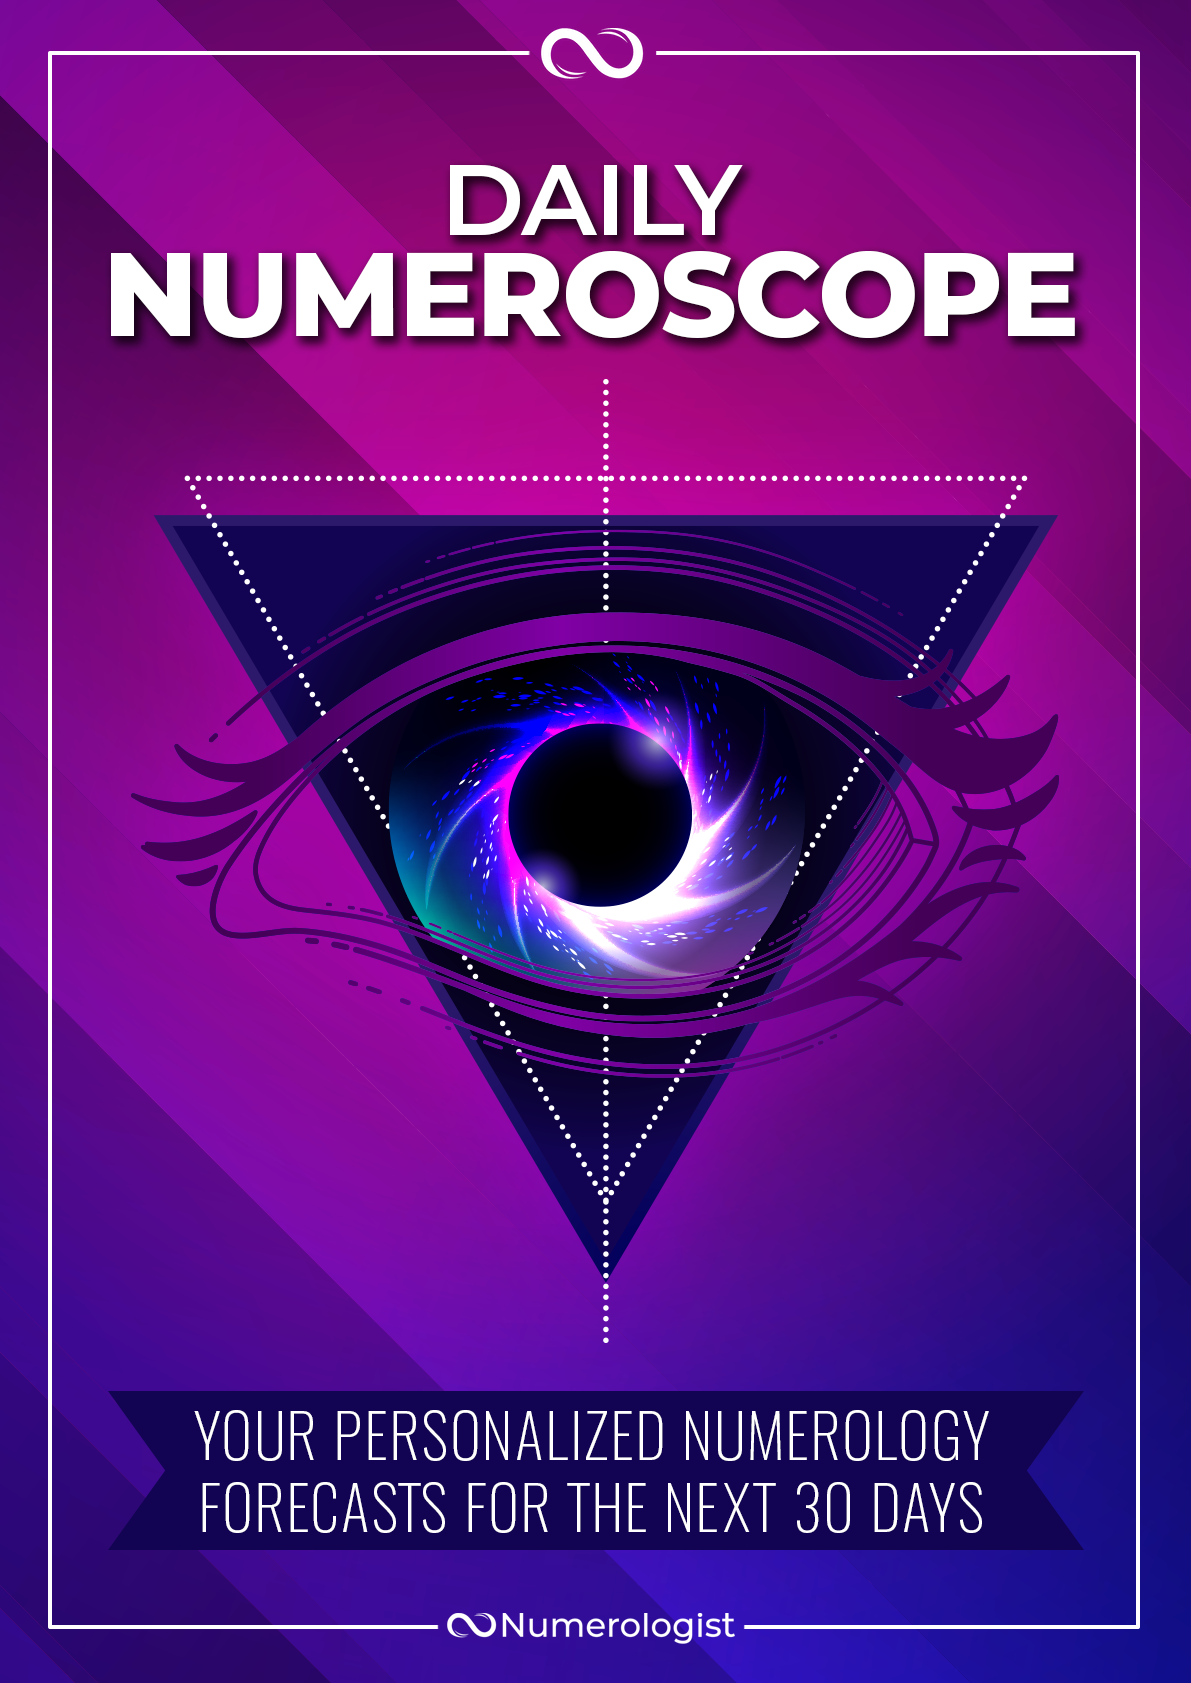 Daily_Numeroscope_Cover_V3.png